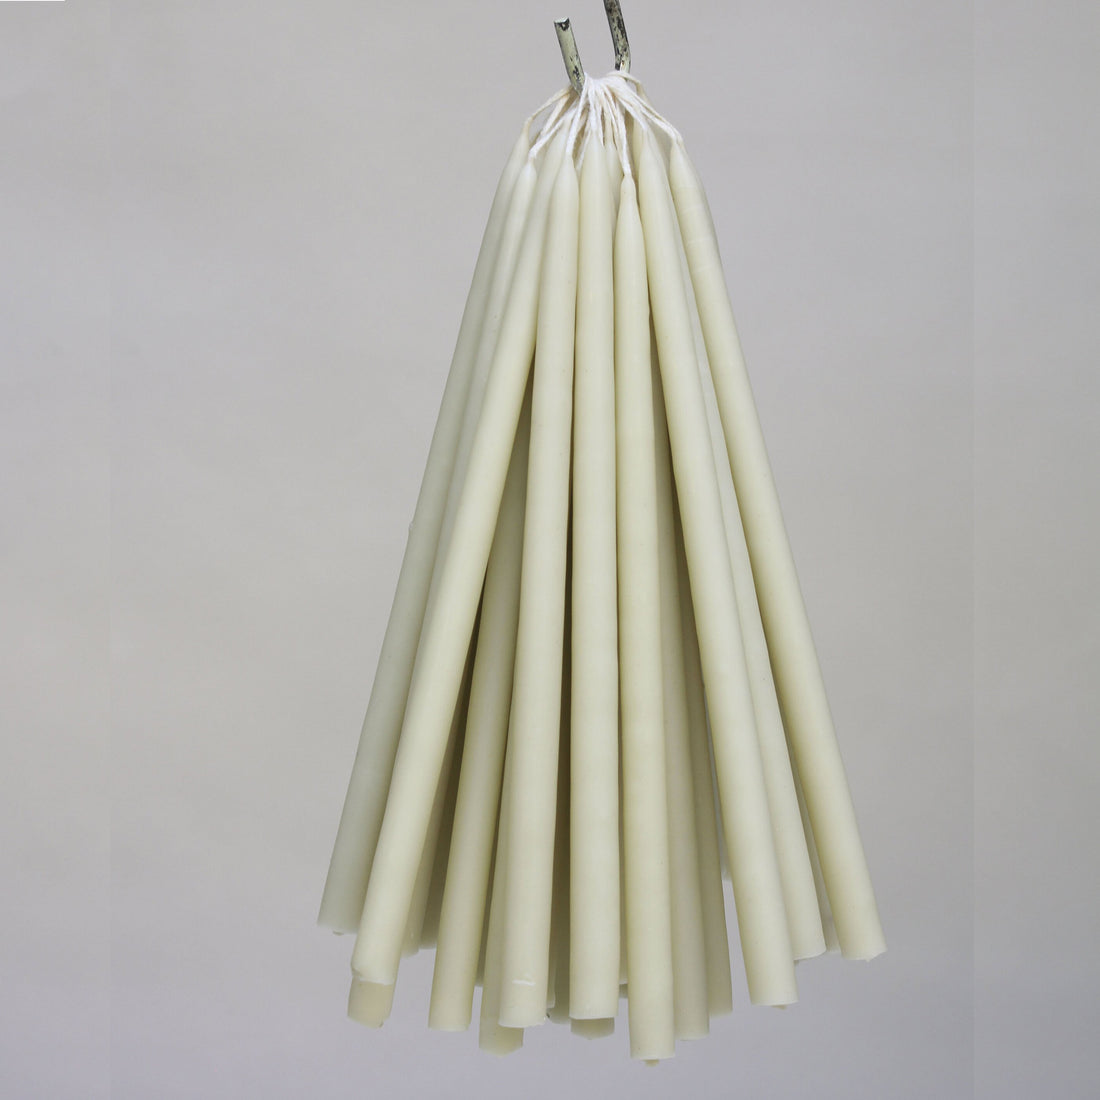 6 SLIM TAPERED BEESWAX CANDLES | MOTHER'S MILK